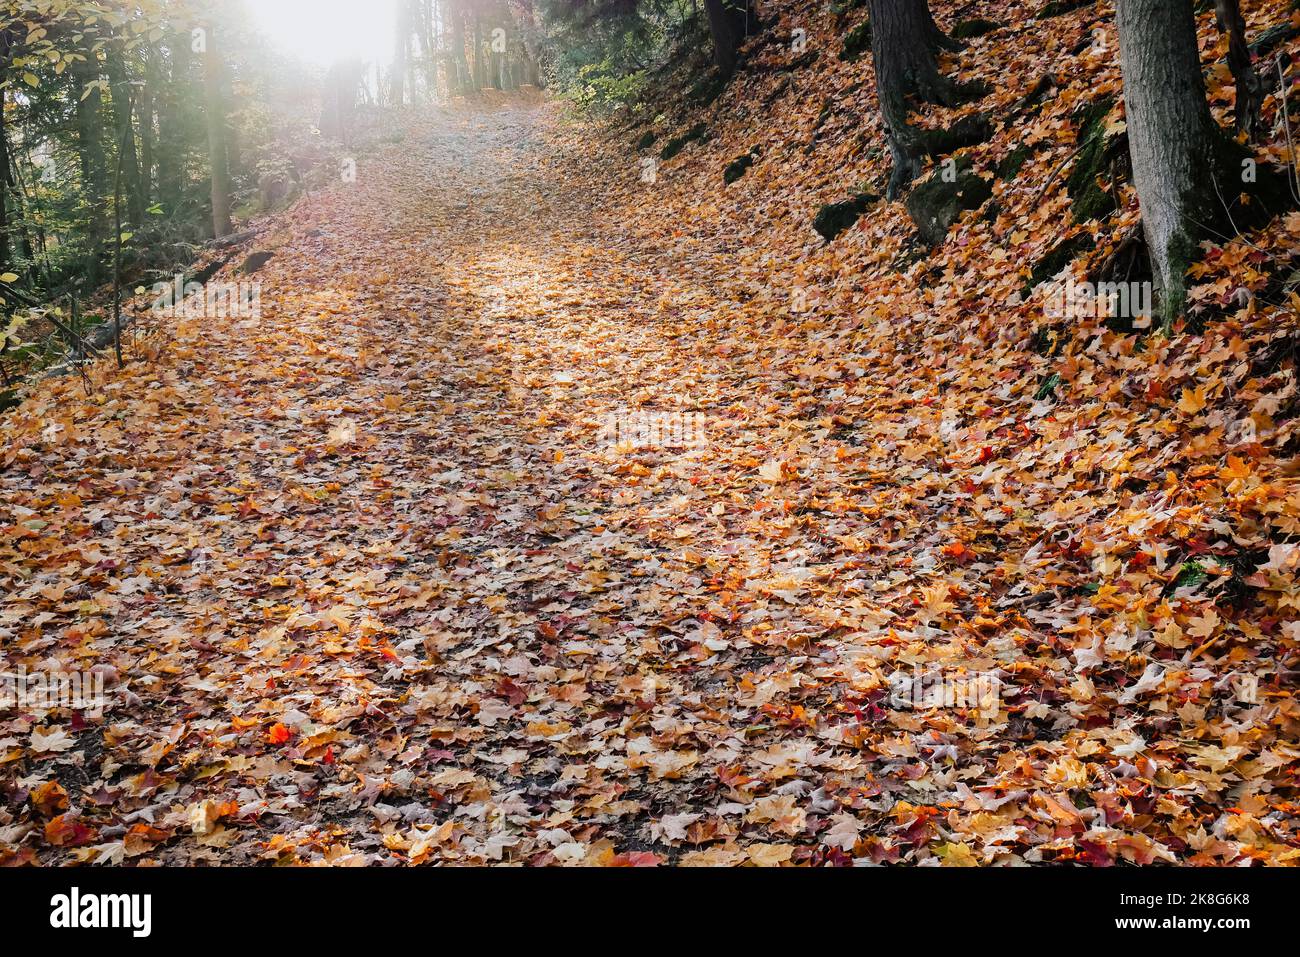 sun flare shining on dried leafs on the ground forest morning Stock Photo